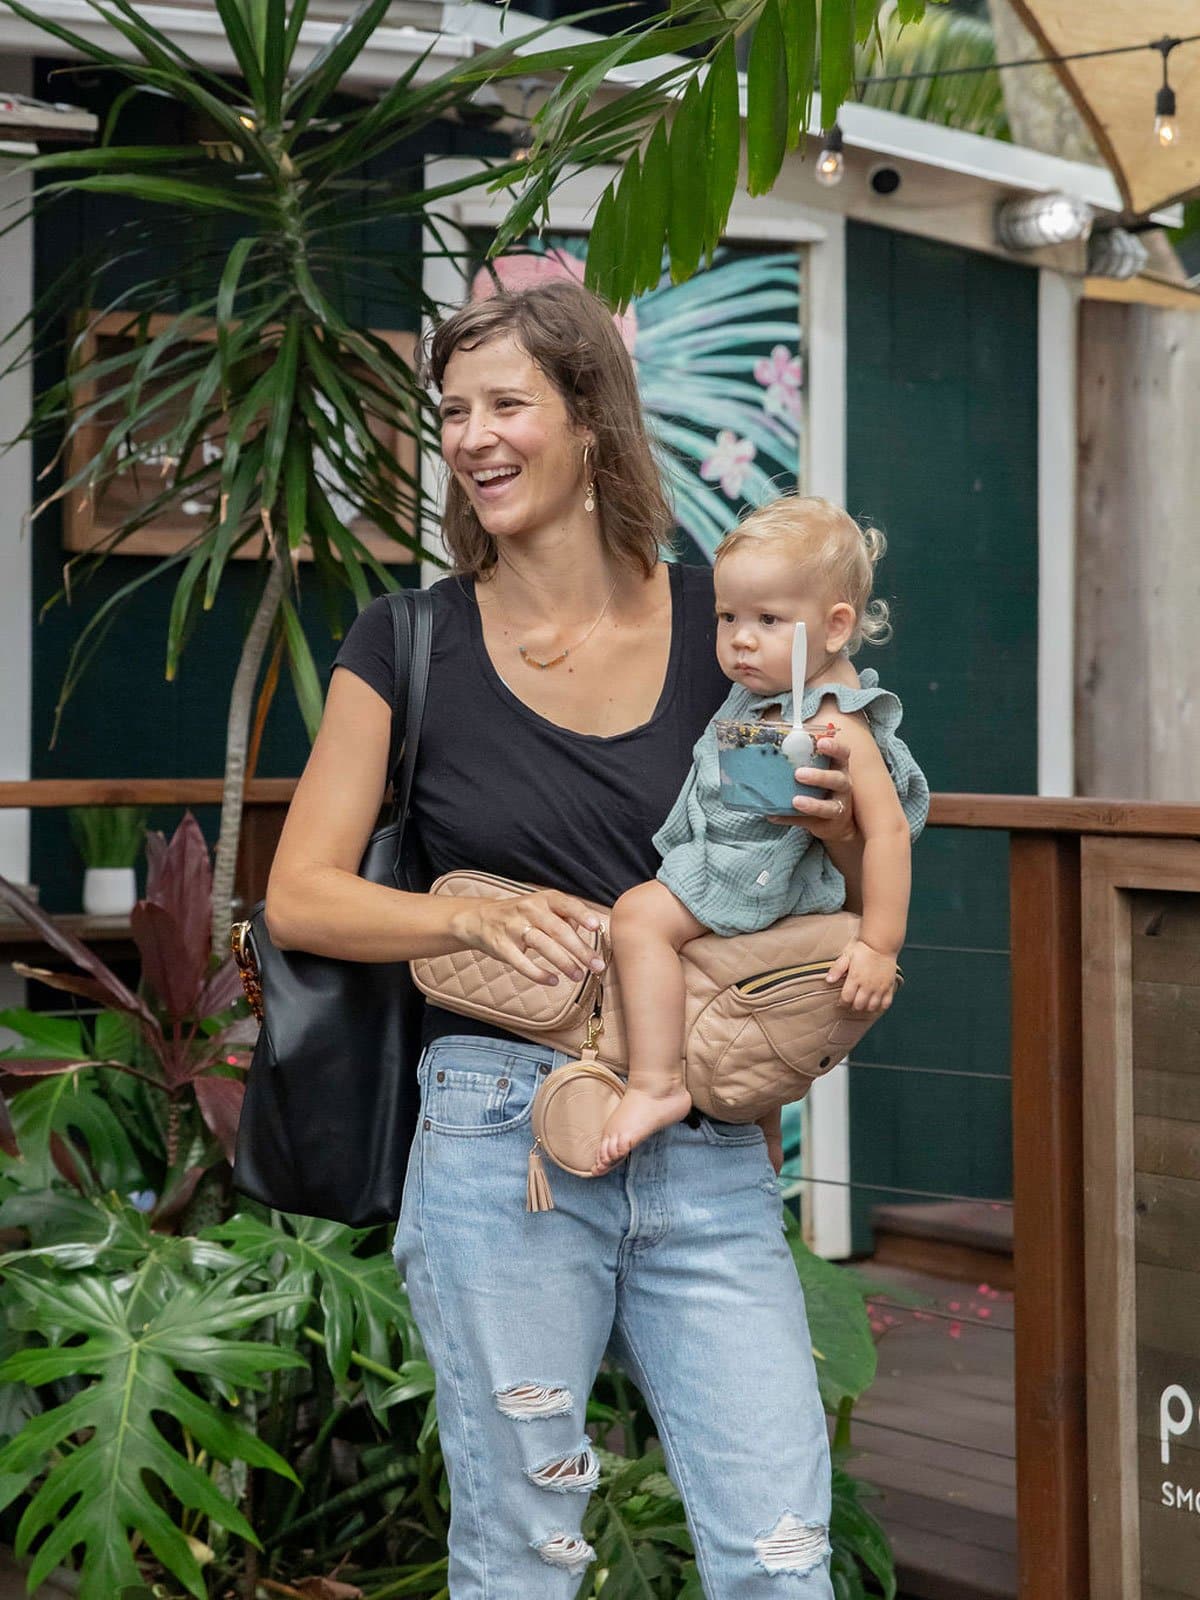 Tushbaby Carrier- Vegan Leather/ Sand